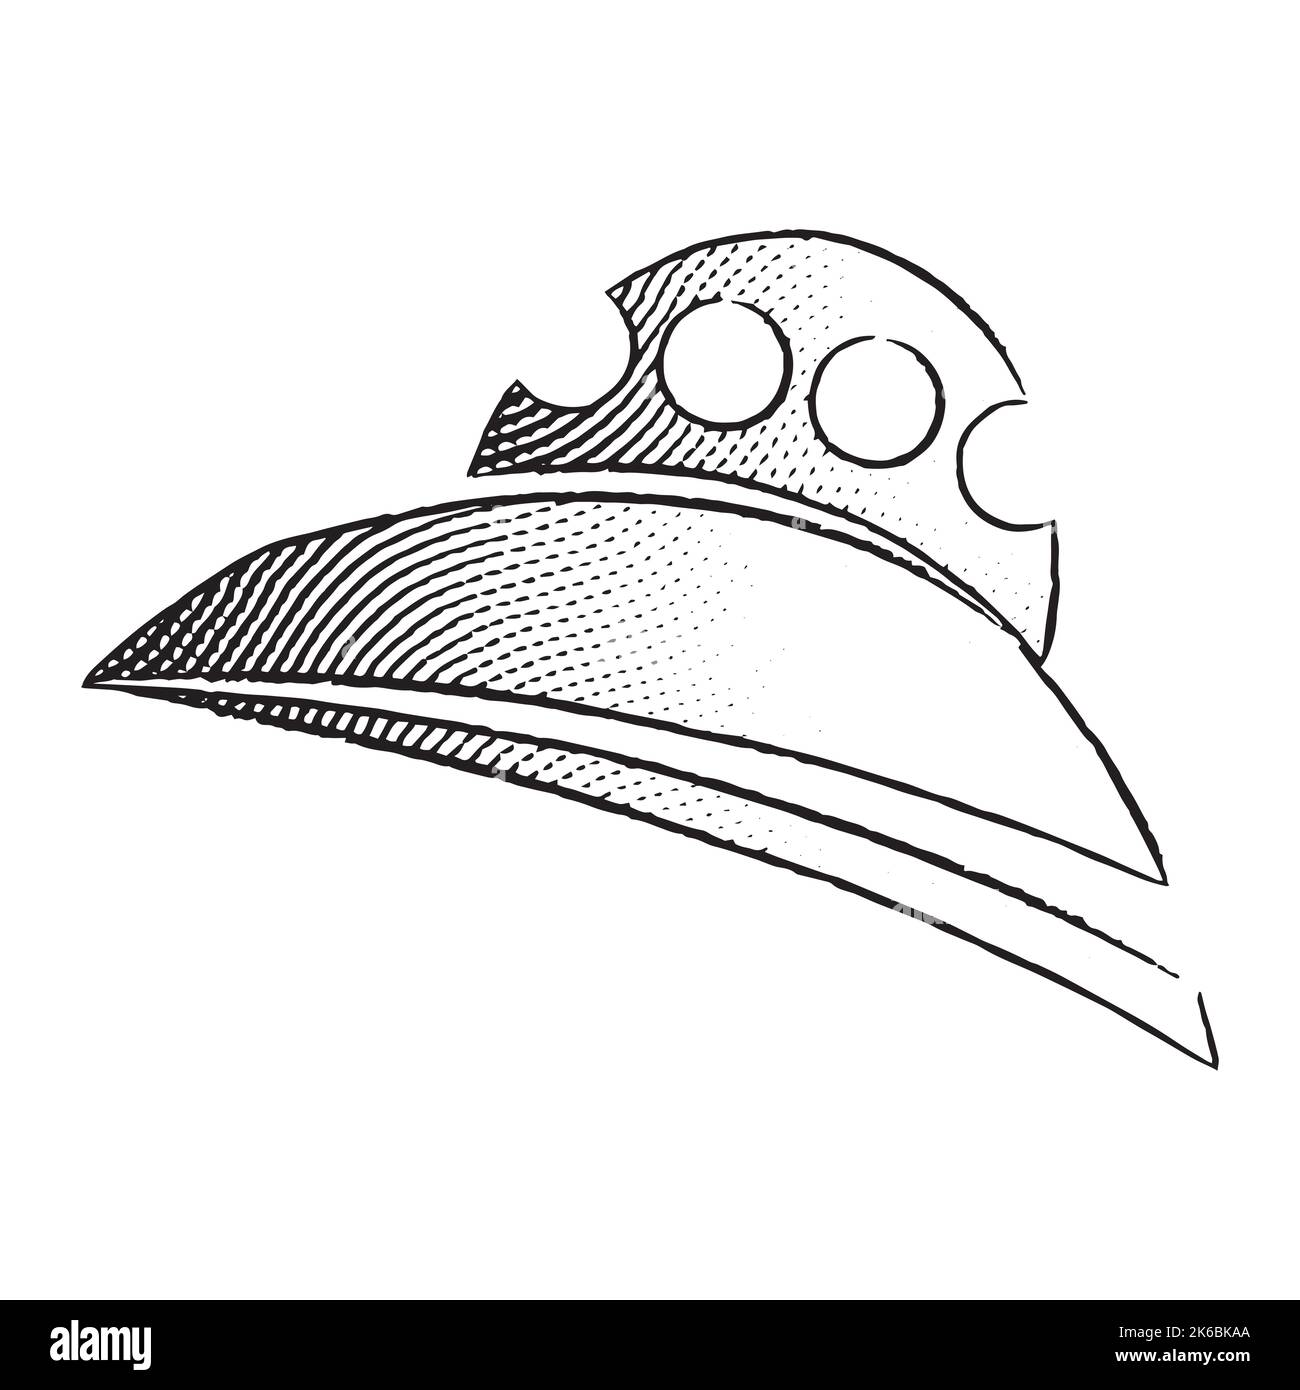 Illustration of Scratchboard Engraved Icon of Alien Ship isolated on a White Background Stock Vector